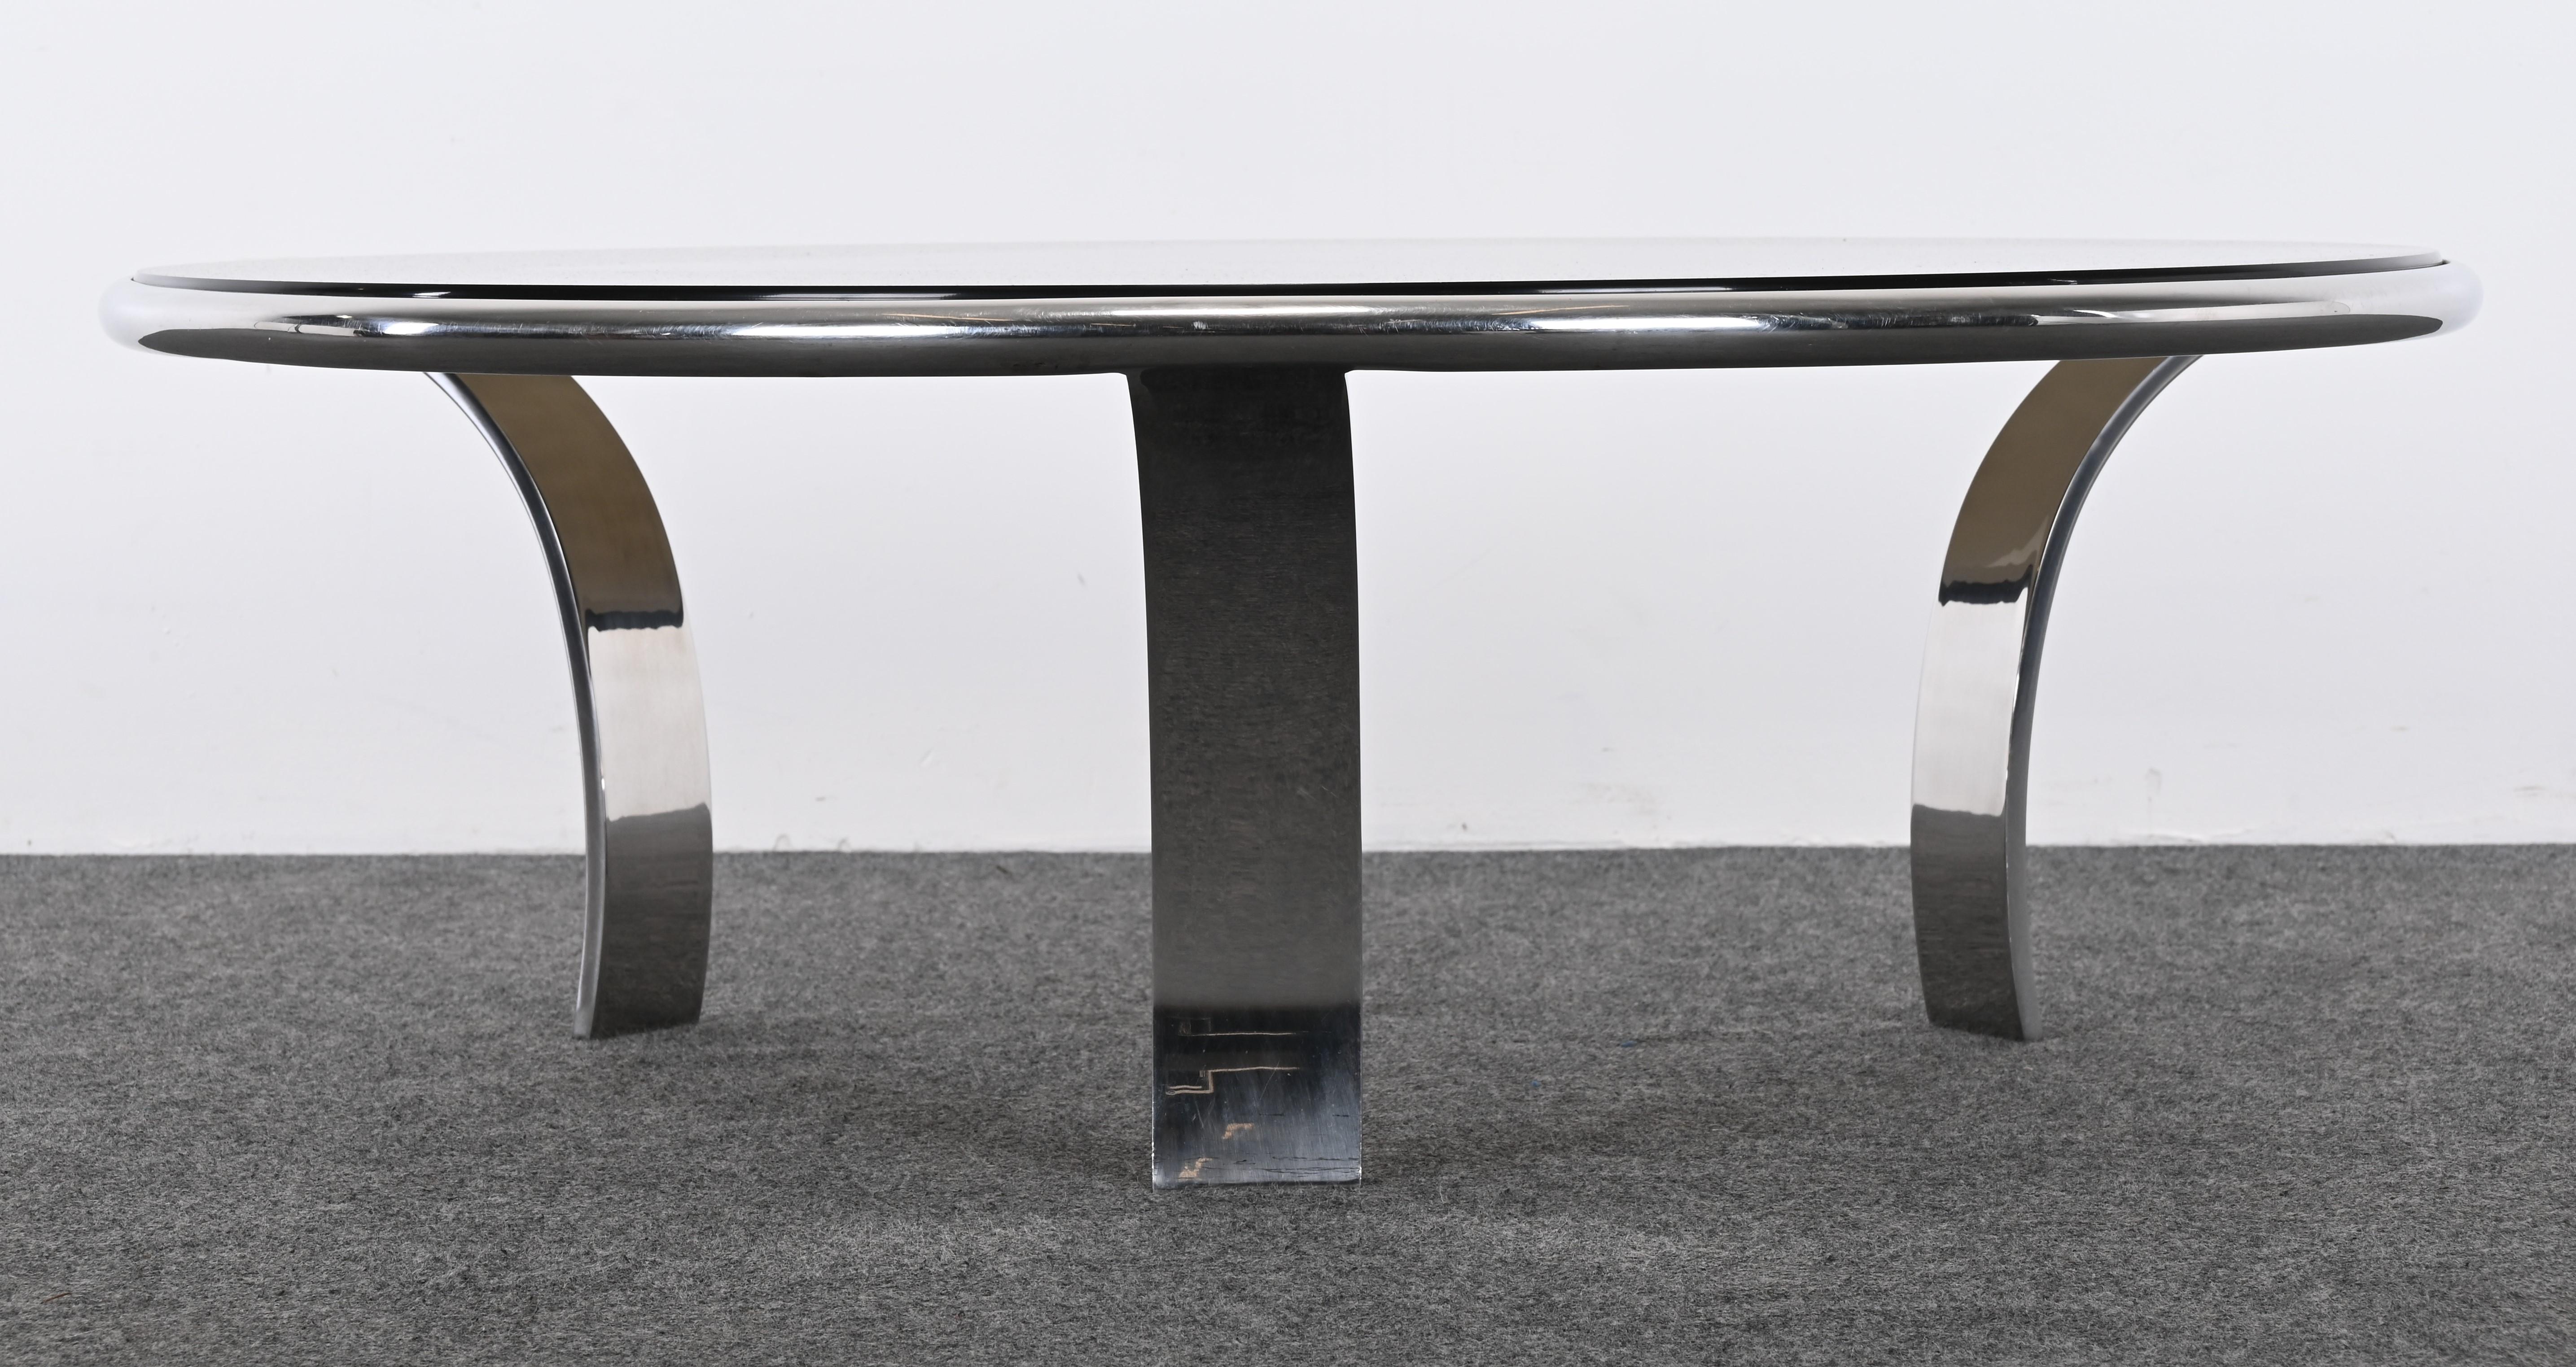 Mid-Century Modern Stainless Steel Coffee Table by Steelcase Designed by Gardner Leaver, 1970s For Sale